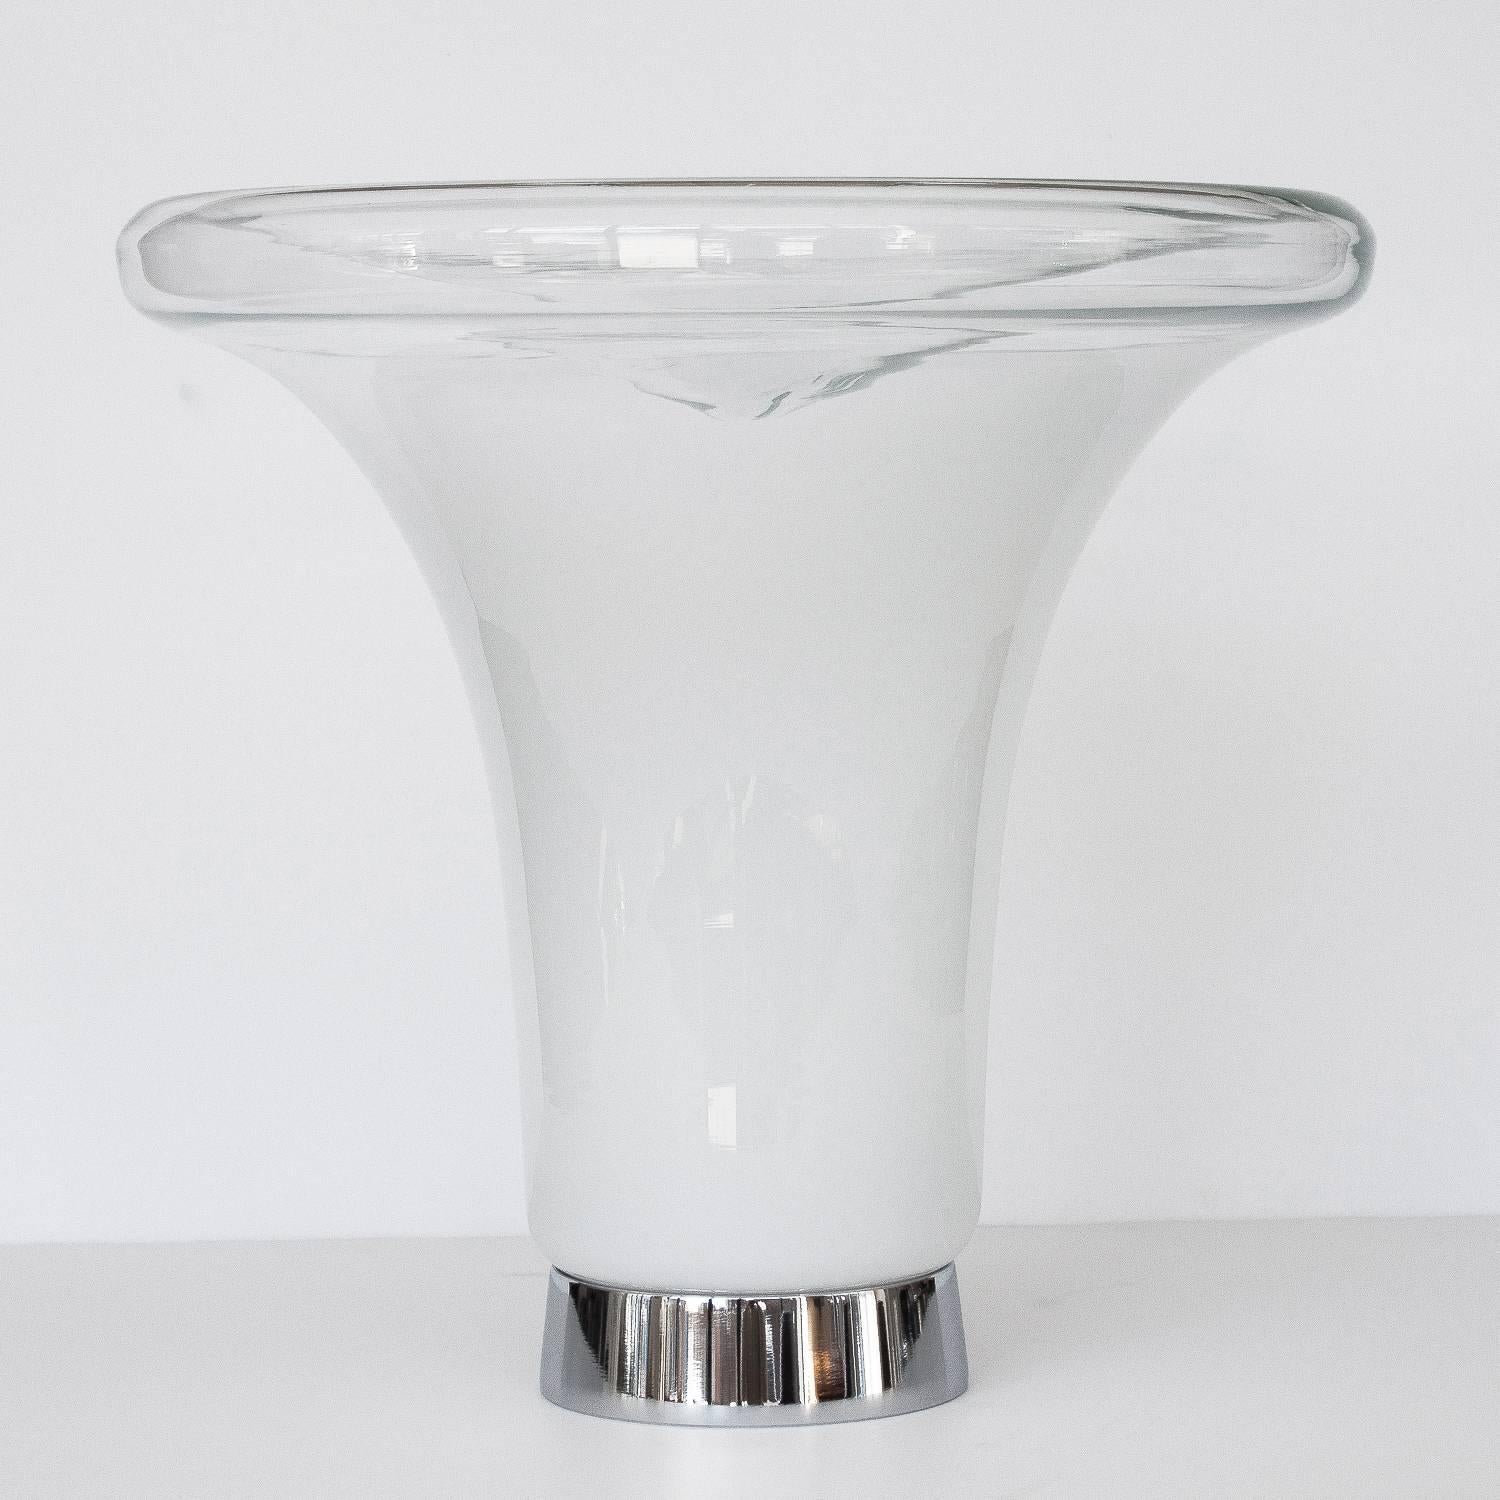 Large 1960s Vistosi Murano tulip / trumpet shaped glass table lamp. Handblown sculptural glass shade with a gradient of white to clear glass from bottom to top. Chrome-plated 7